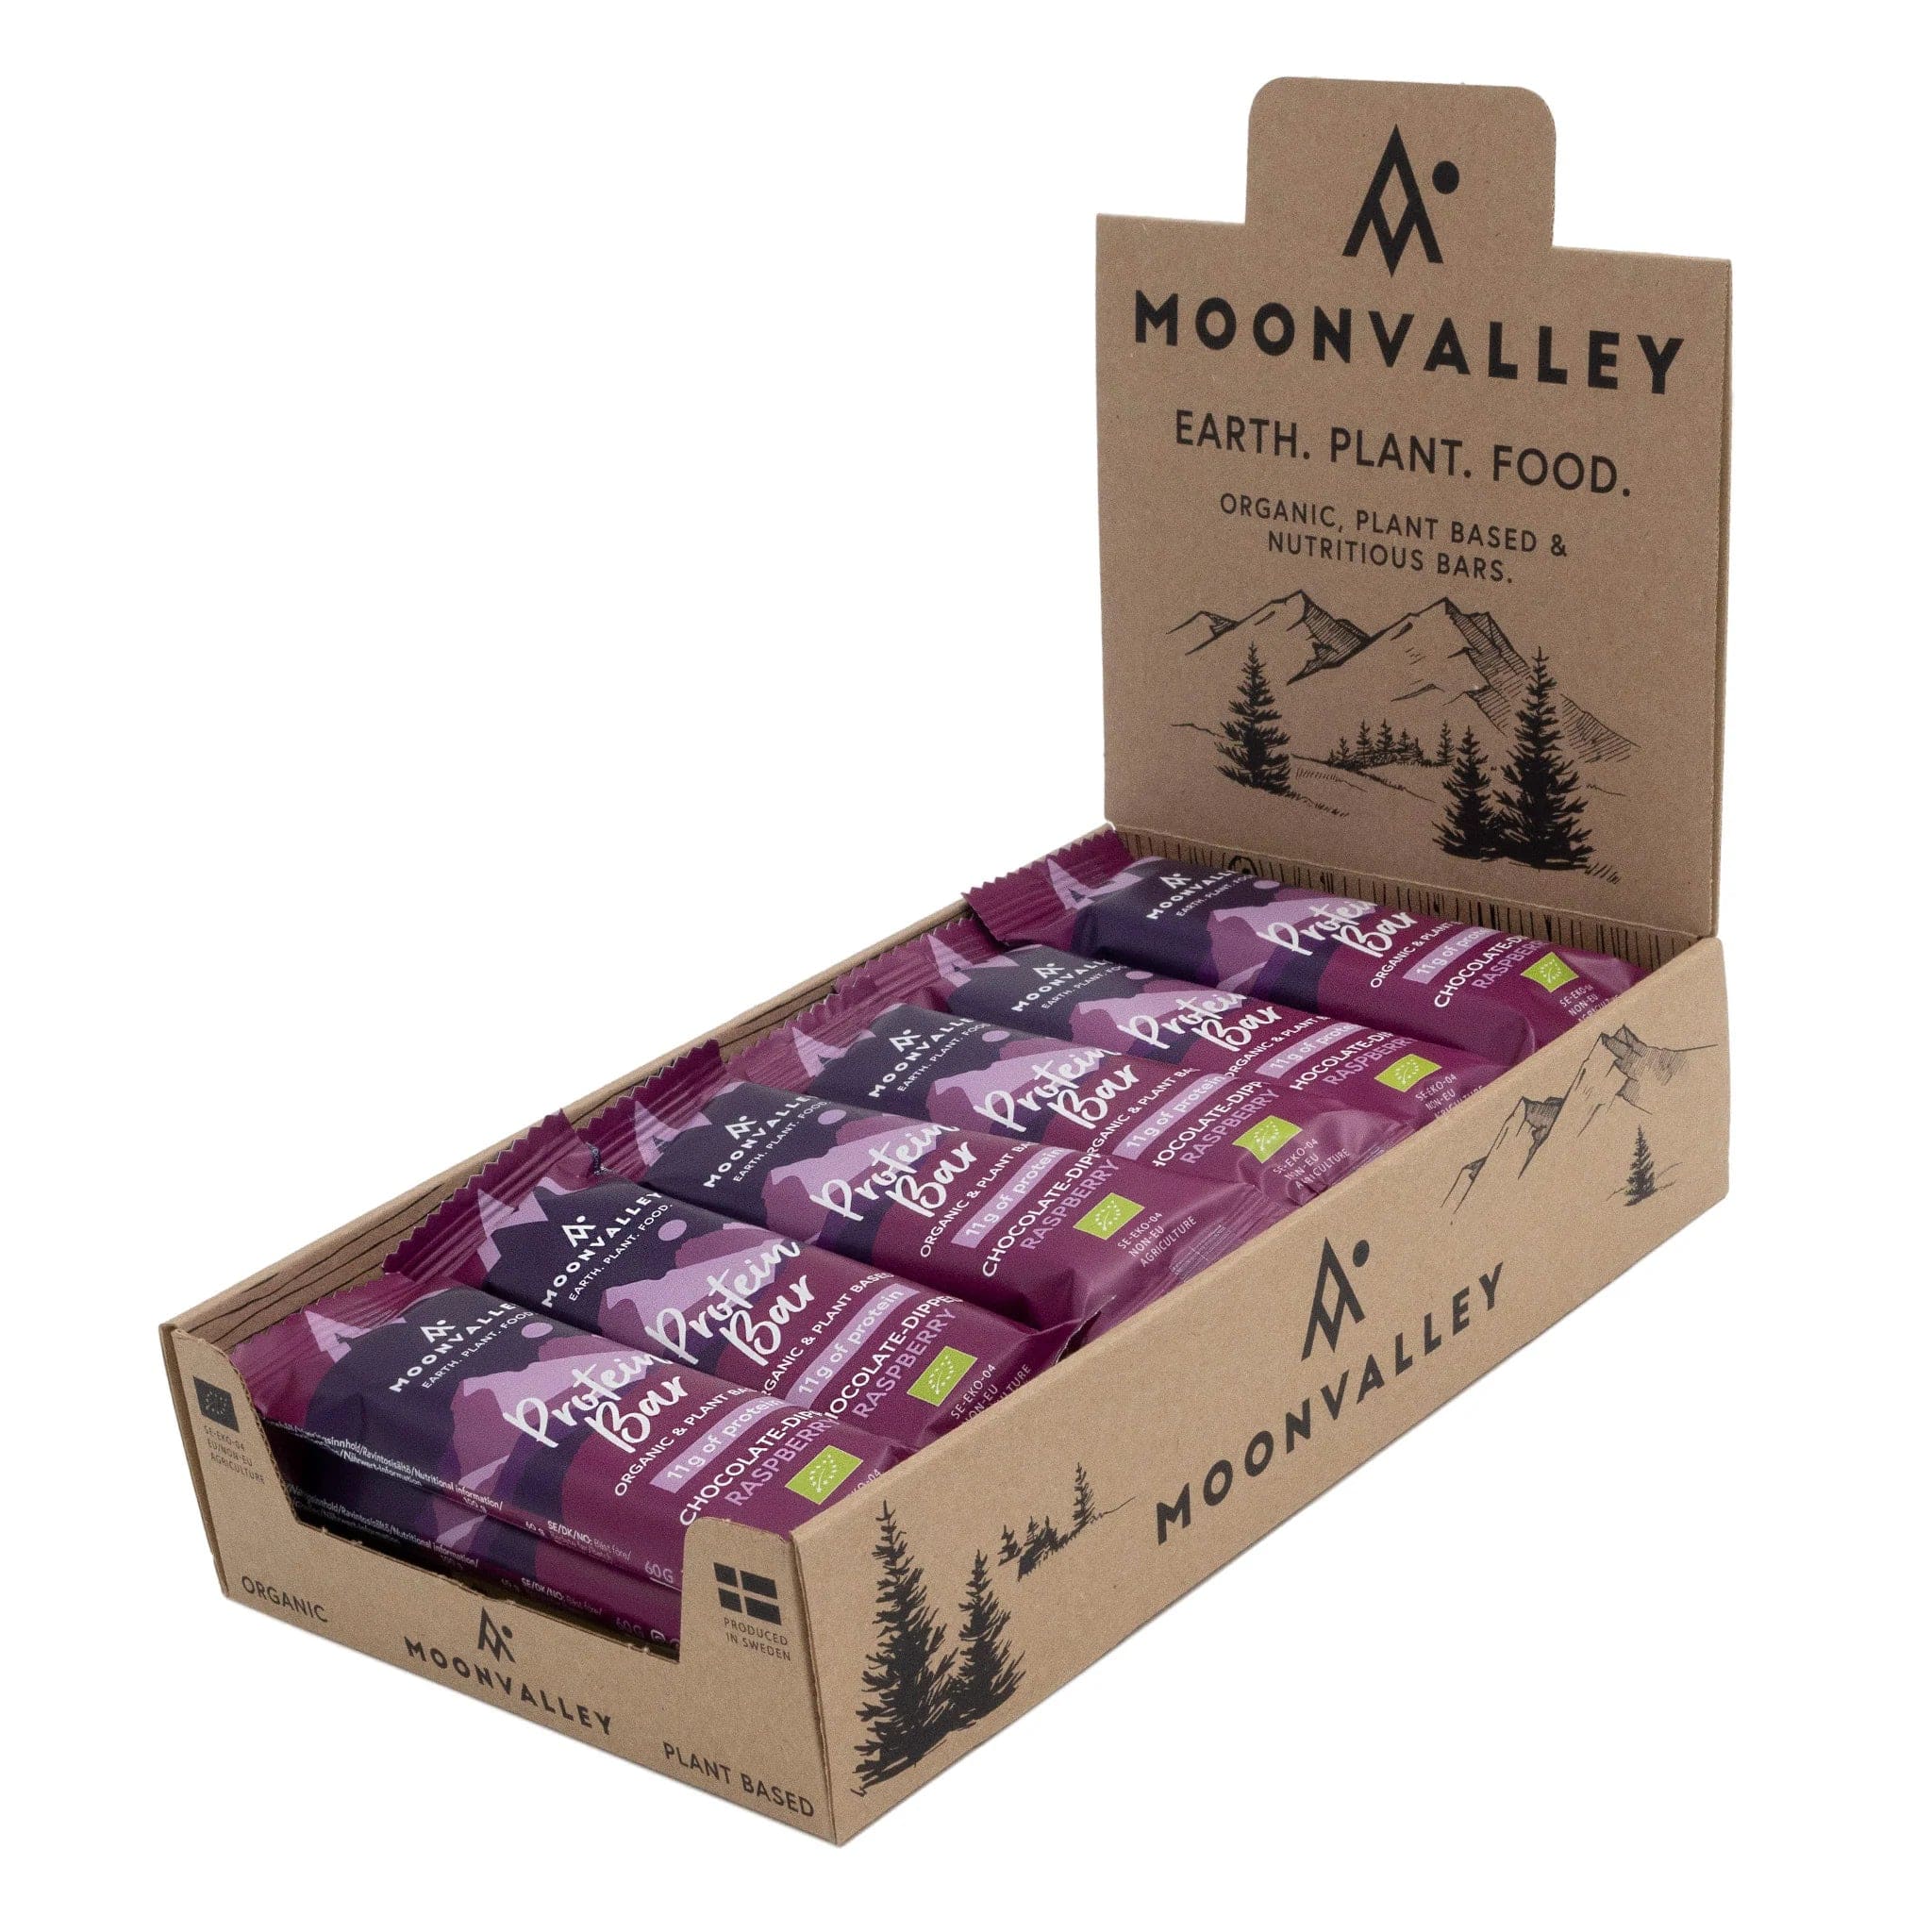 Moonvalley Protein Bar Box of 18 / Raspberry Organic Protein Bar Chocolate-Dipped (60g) XMiles